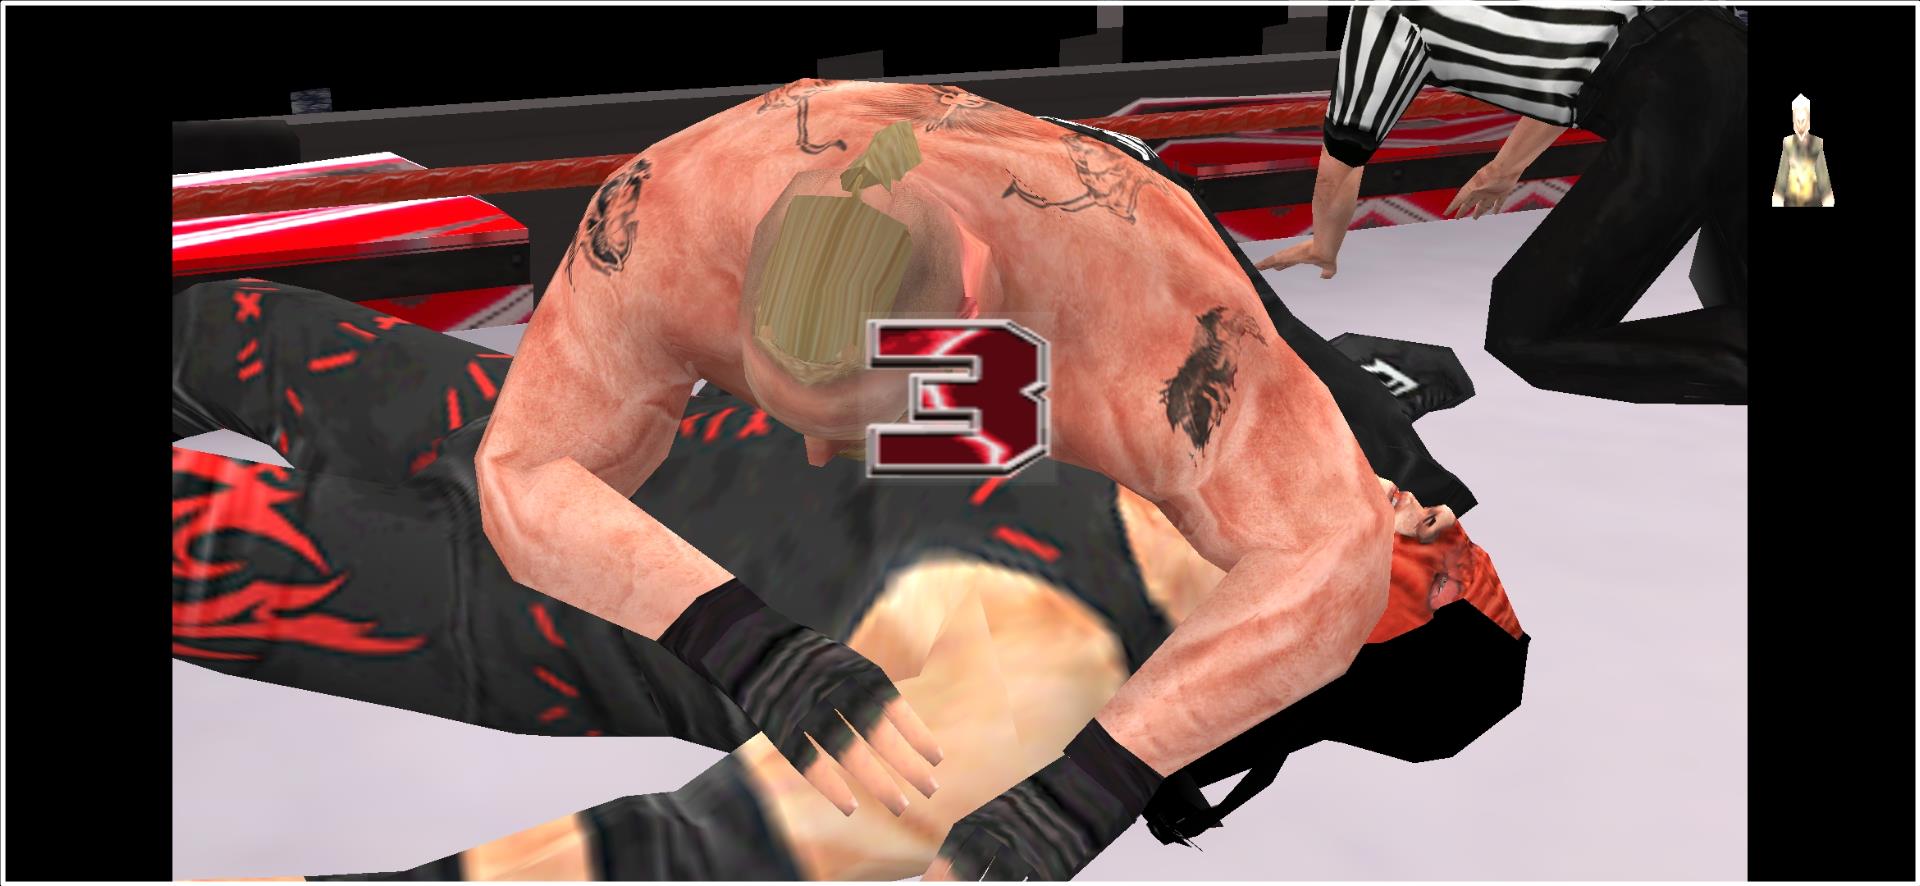 WWE Mini 2K22 PSP/Android/PPSSPP 